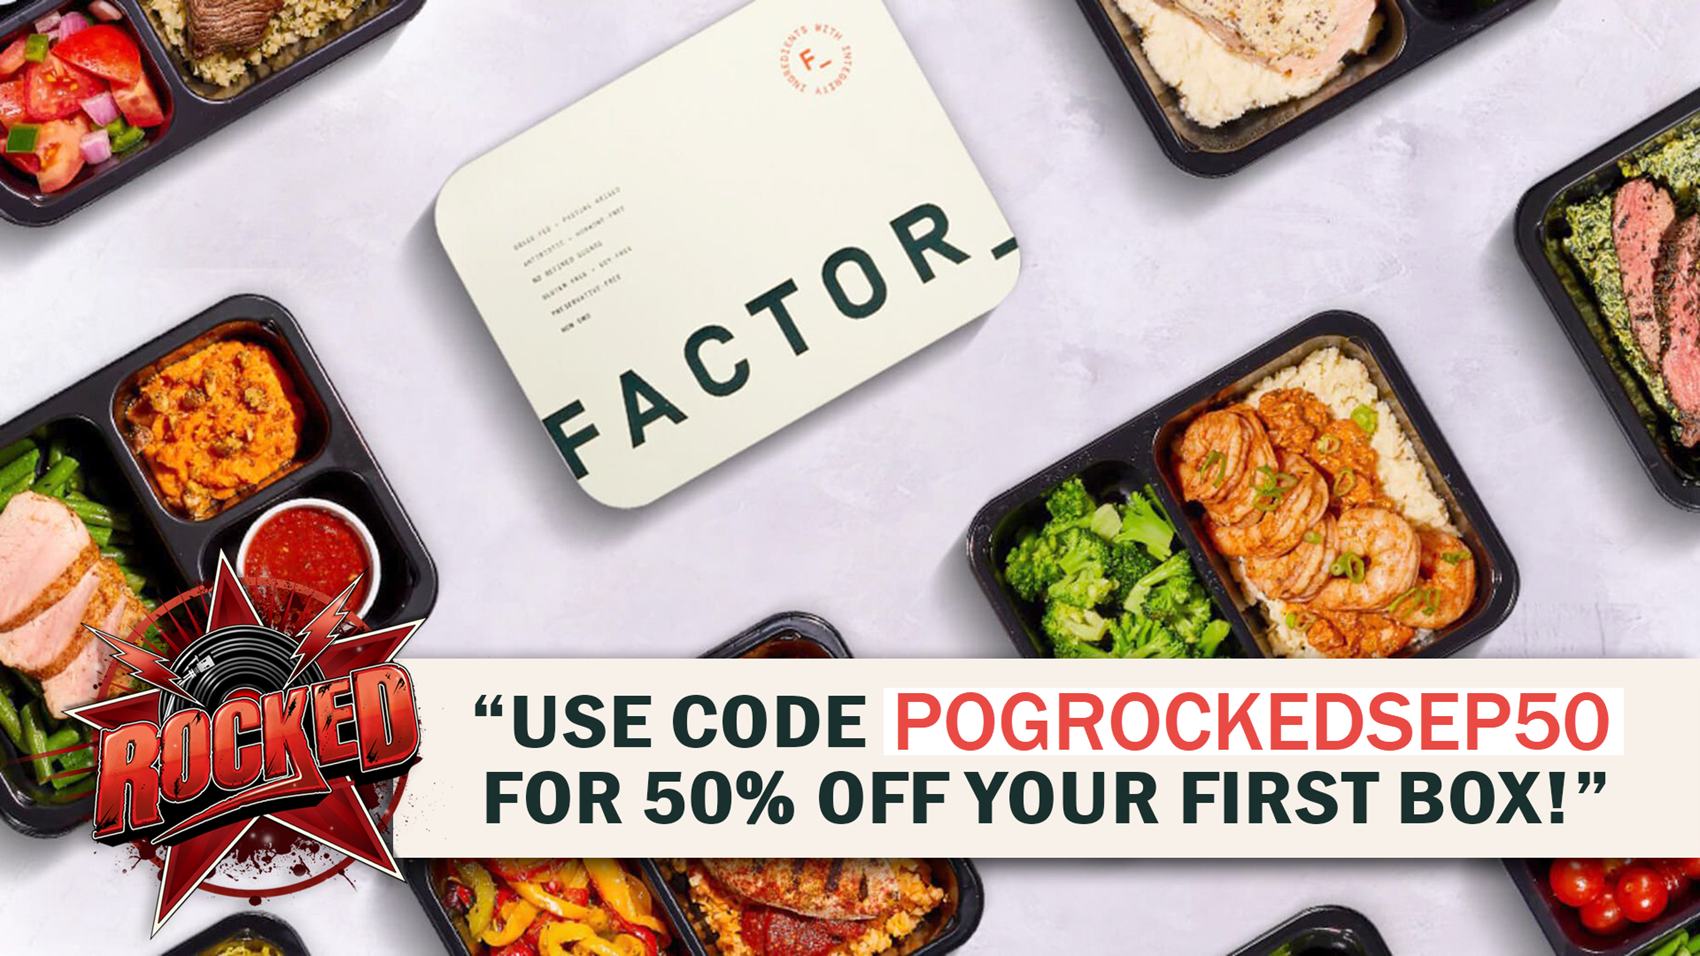 Thanks to Factor75 for sponsoring today's video. Go to https://strms.net/factor75_rockednet2882 and use code POGROCKEDSEP50 for 50% off your first box! 
